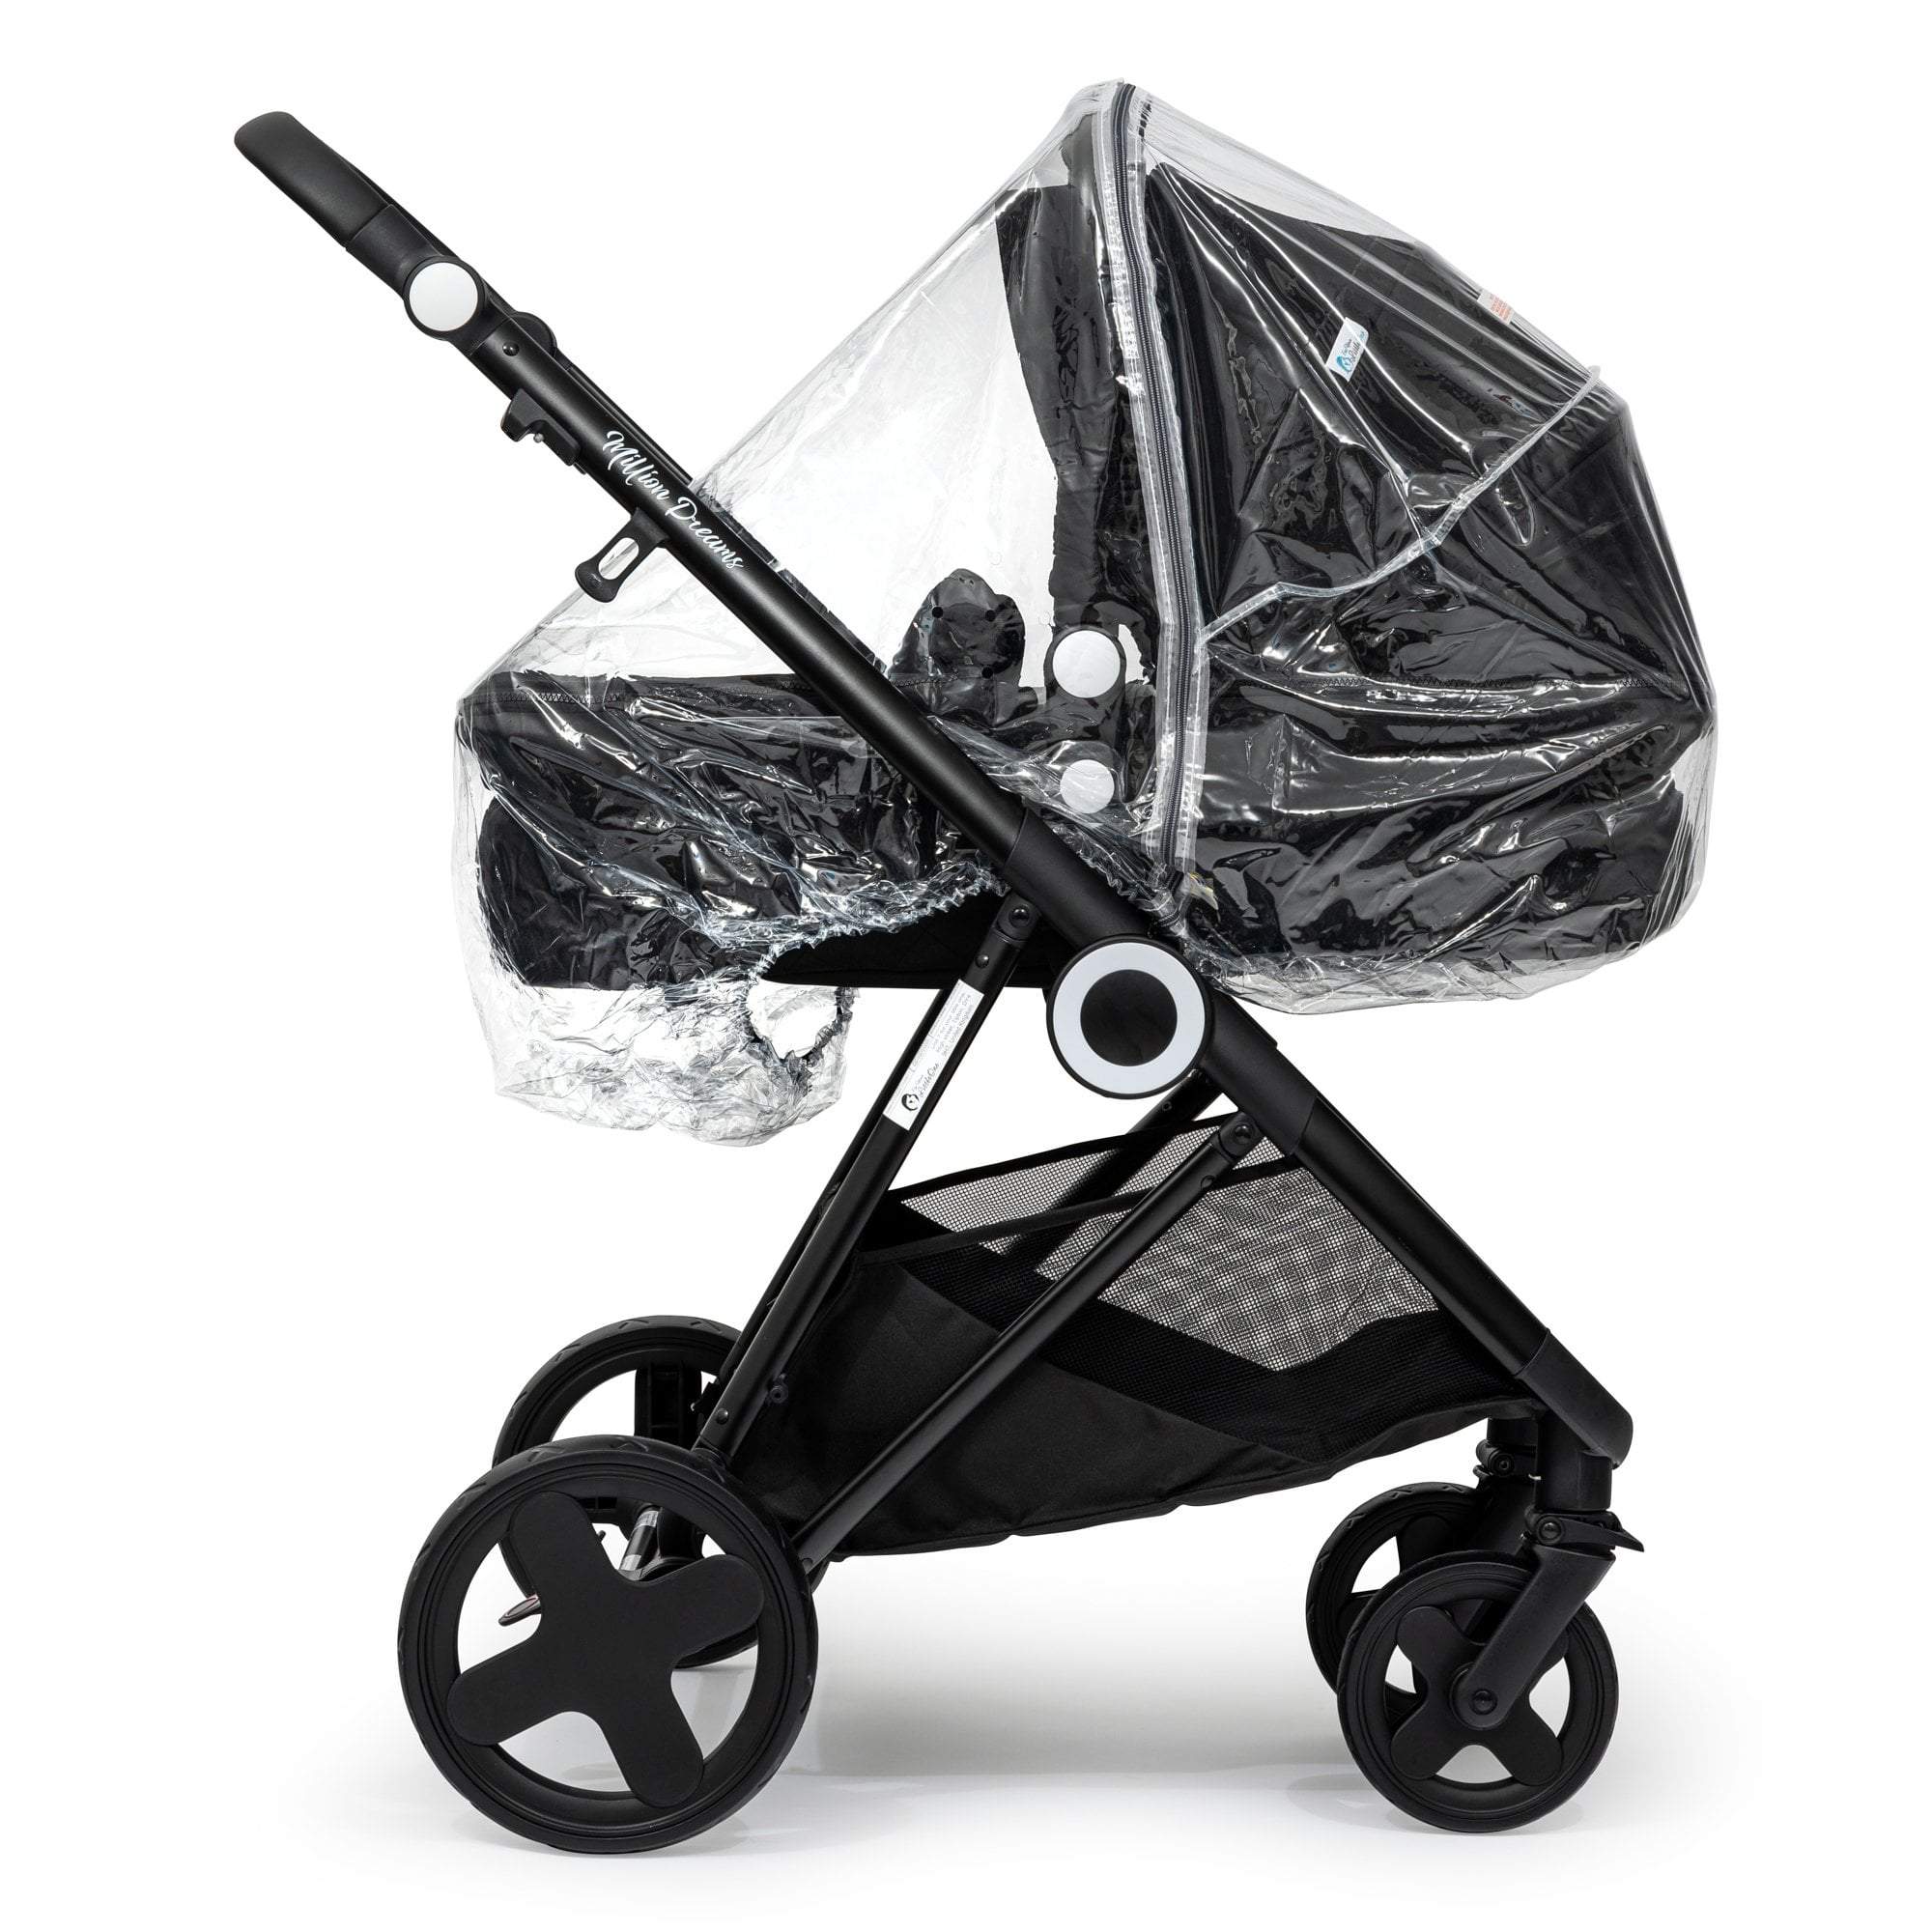 Carrycot Raincover Compatible With Easywalker - Fits All Models - For Your Little One